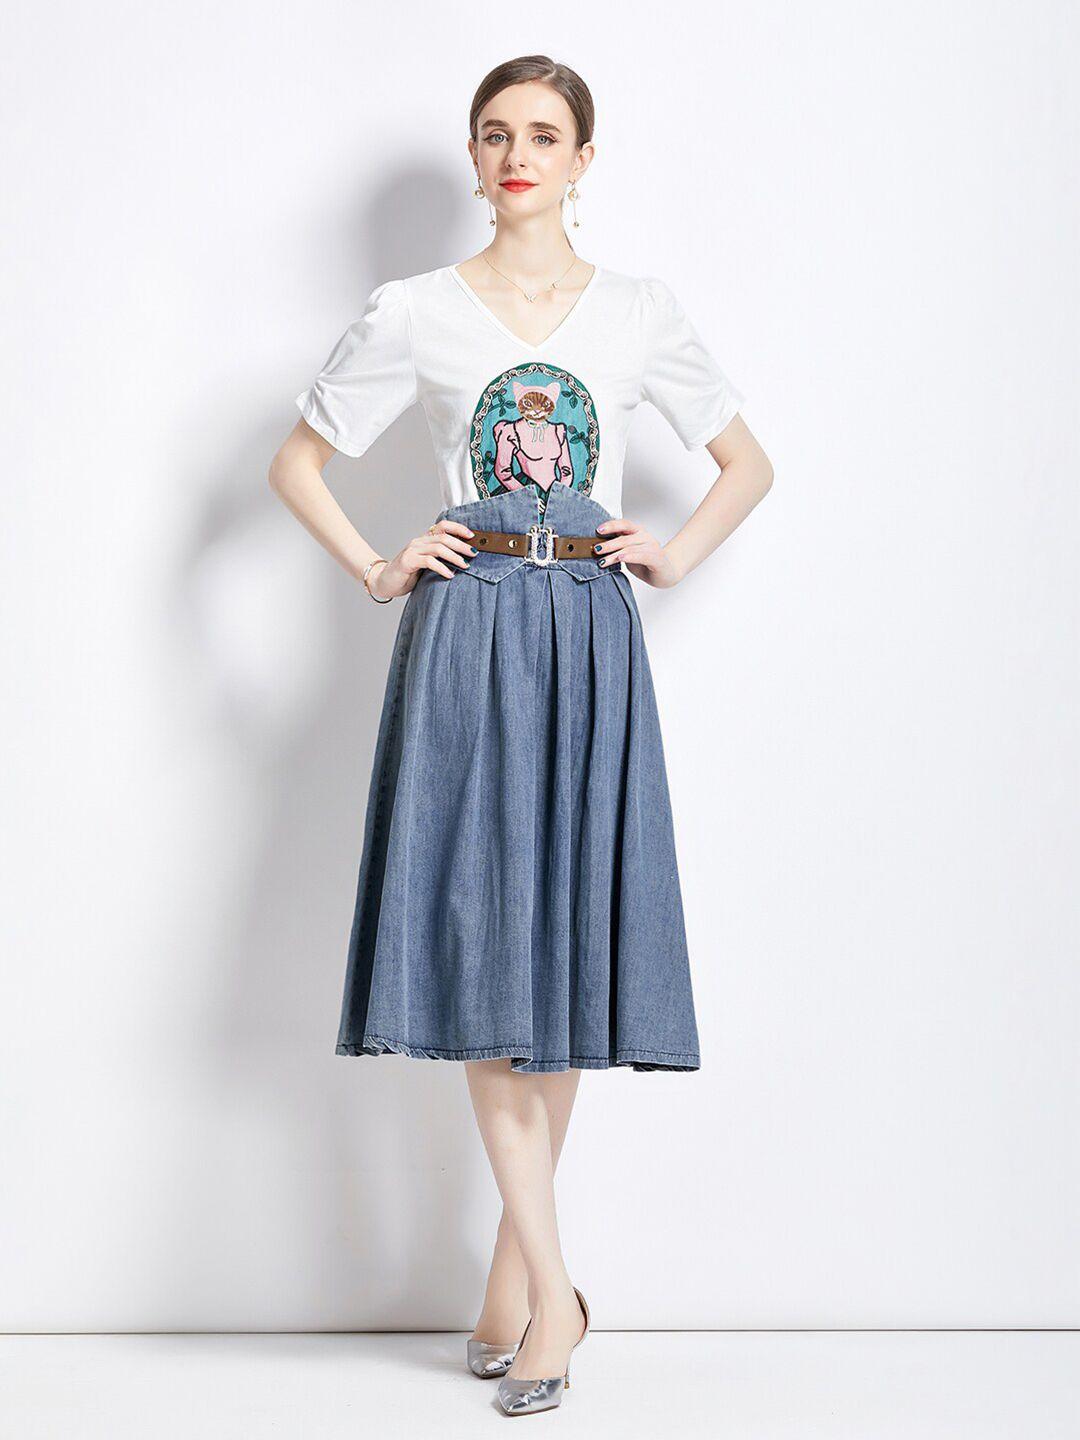 jc collection graphic printed top & a-line skirt